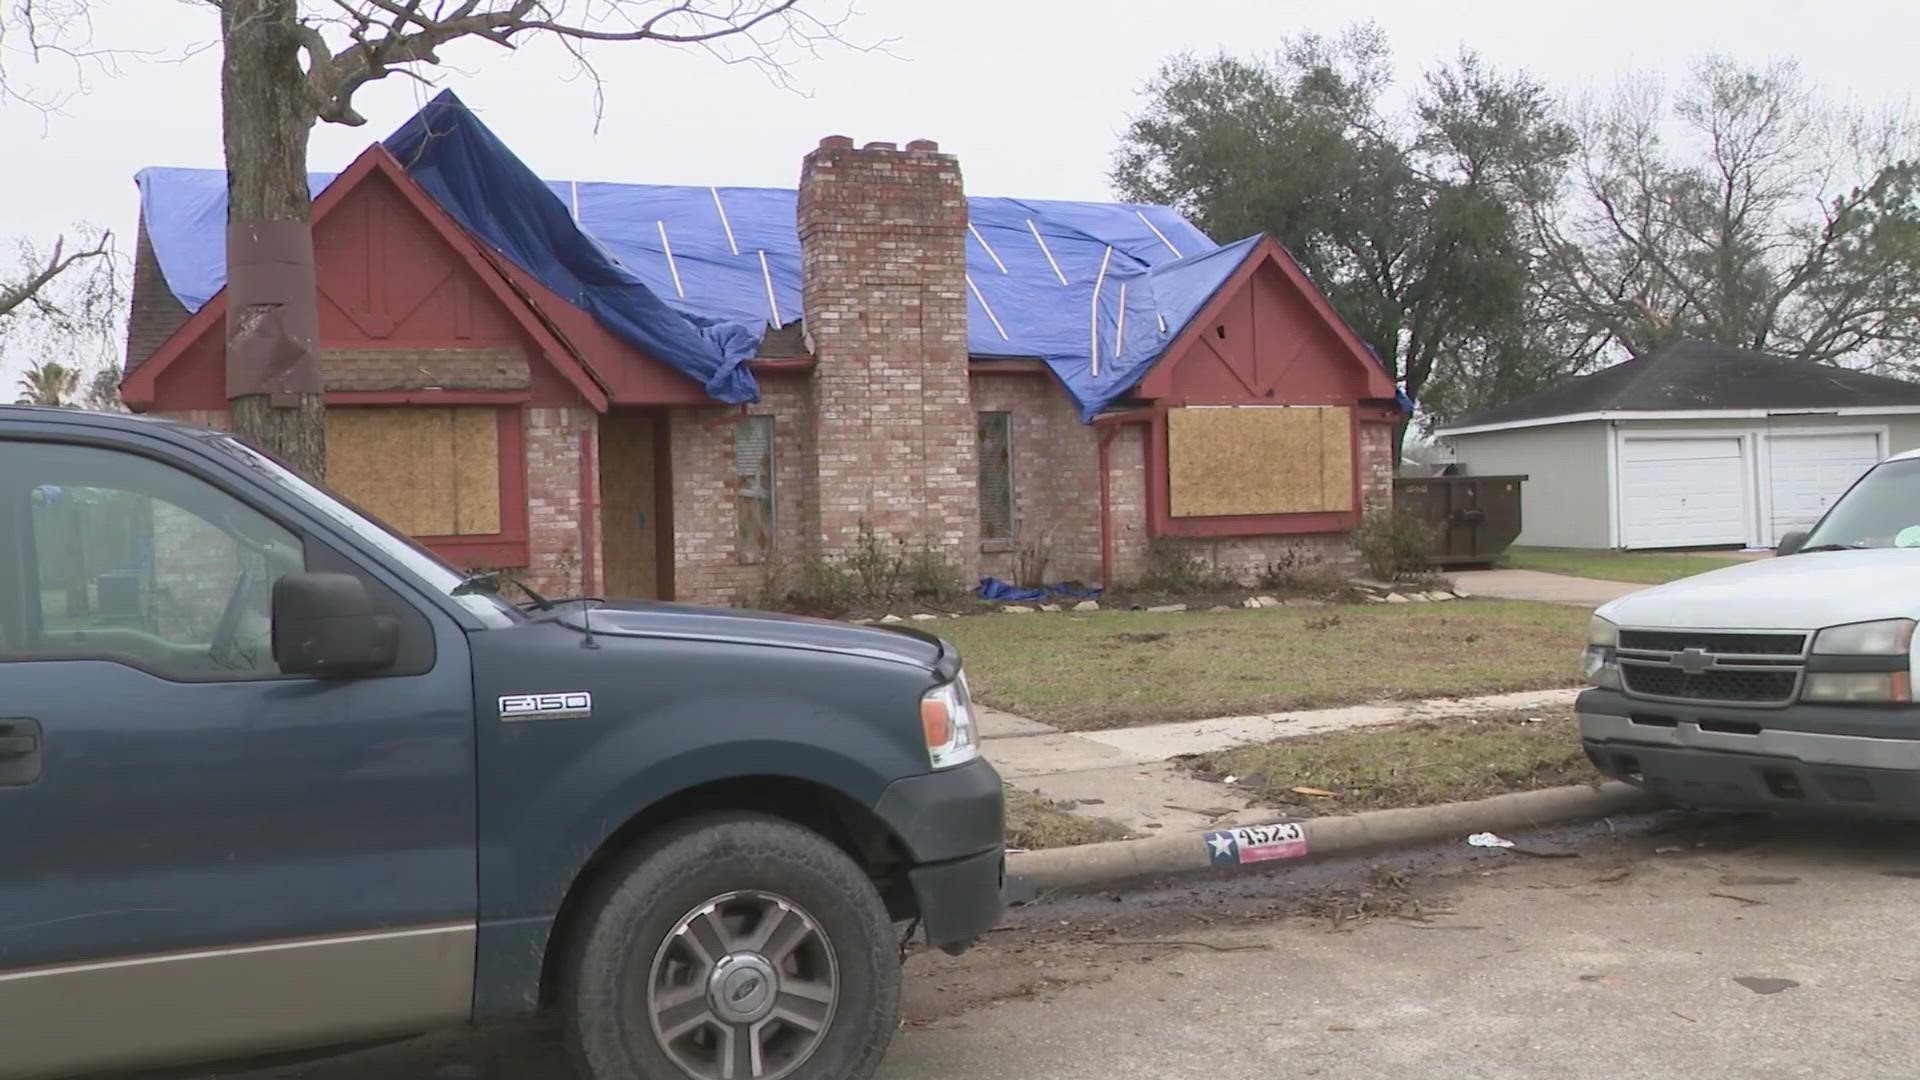 Homeowners in hard-hit Pasadena are already at work on repairs and they said they have no intention of leaving.